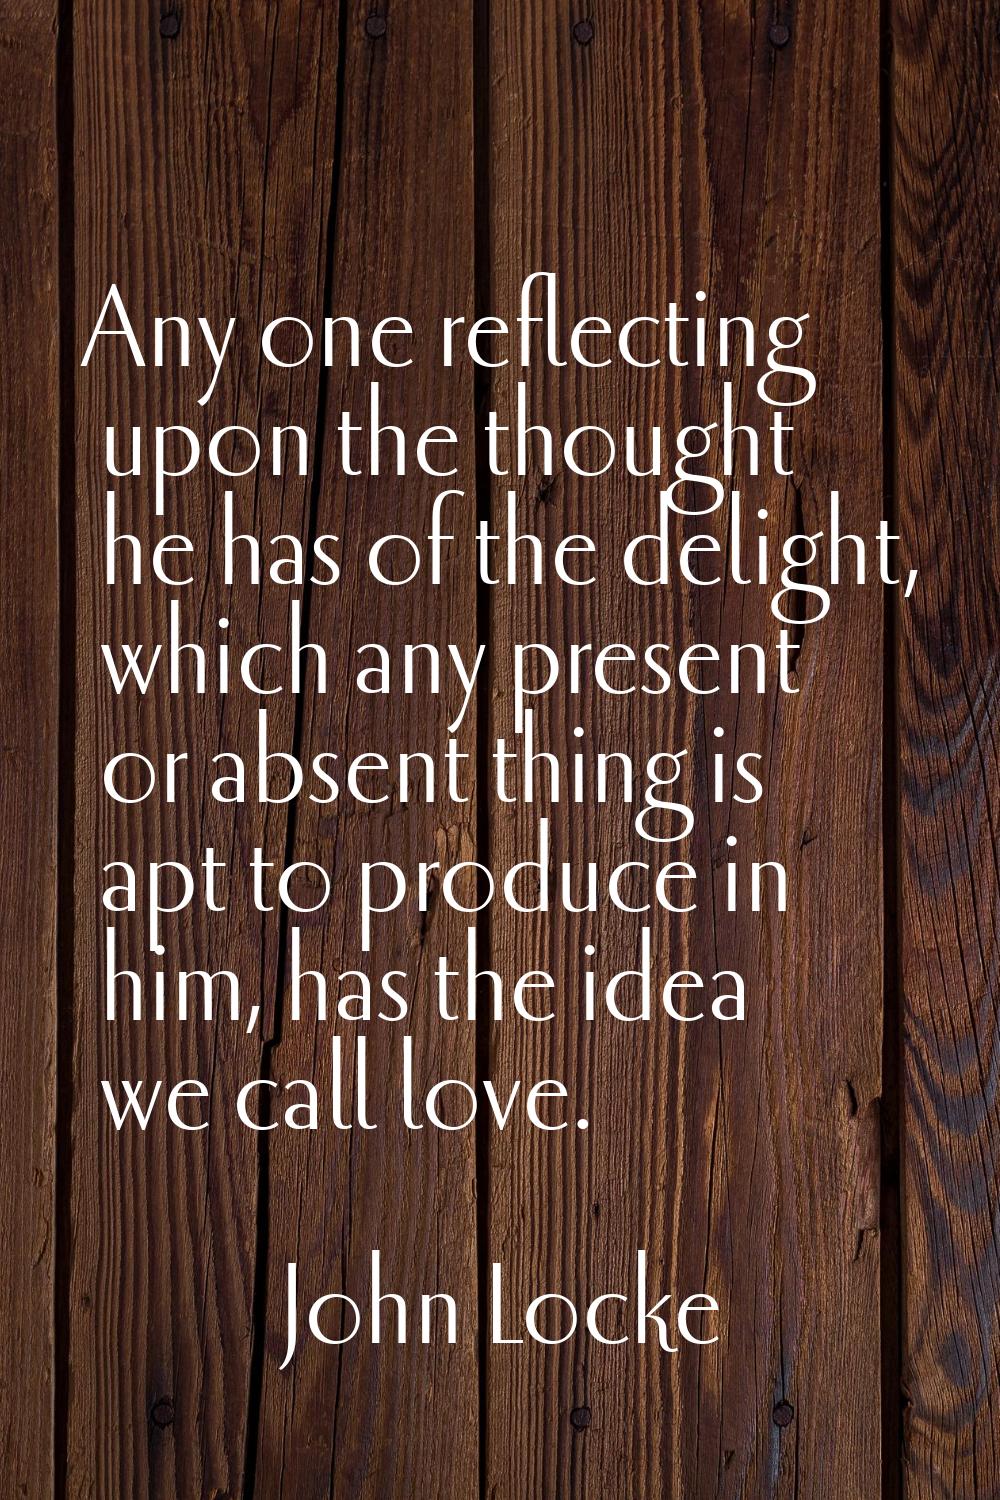 Any one reflecting upon the thought he has of the delight, which any present or absent thing is apt